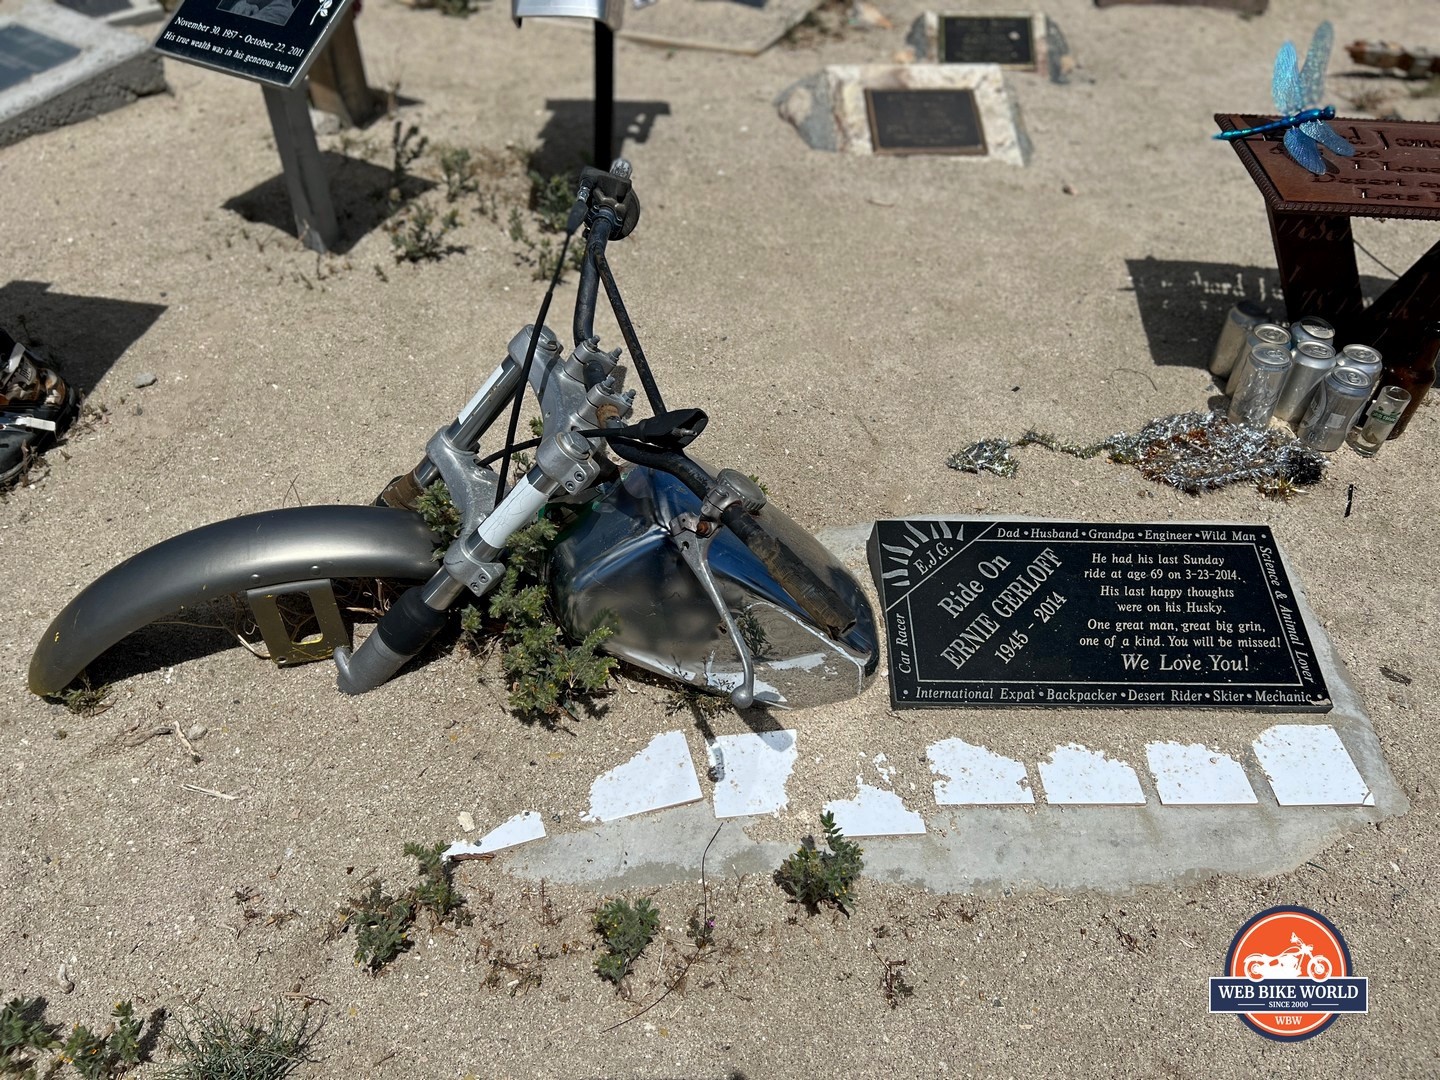 A motorcycle monument buried at the Husky Memorial in Mojave.